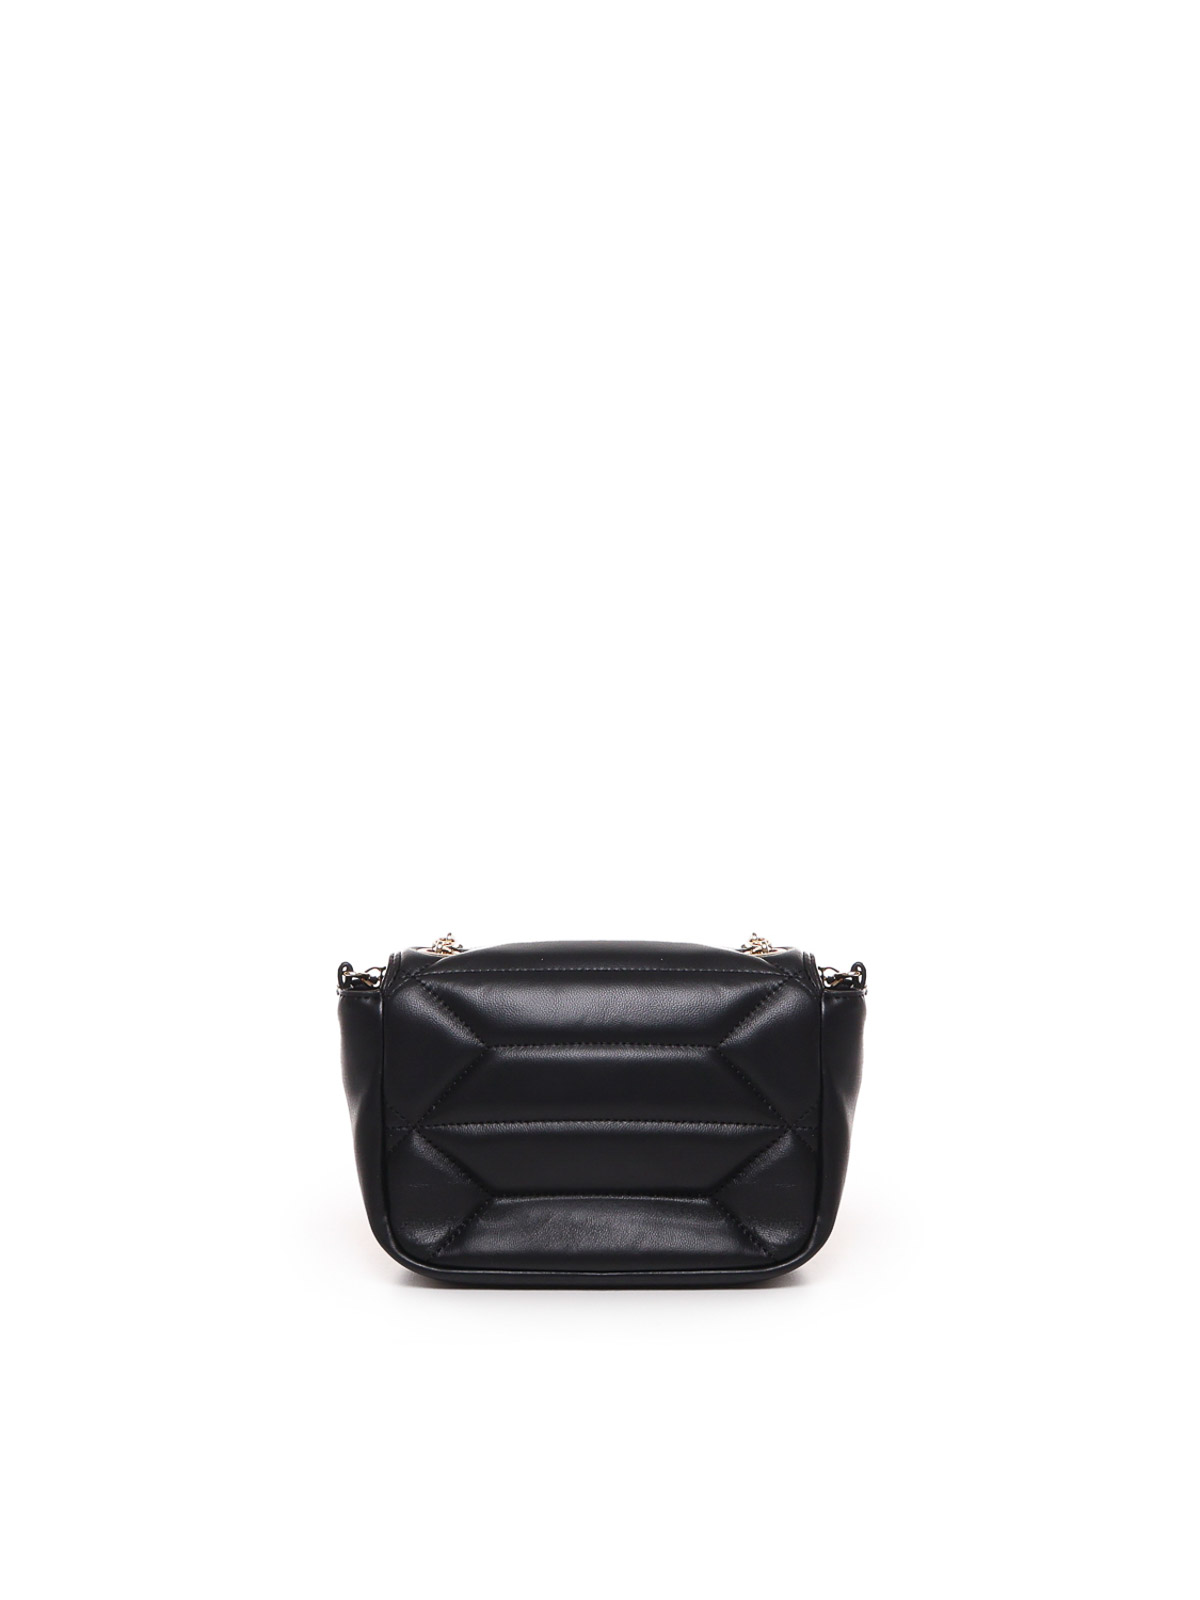 Shop Love Moschino Ecoleather Shoulder Bag In Negro